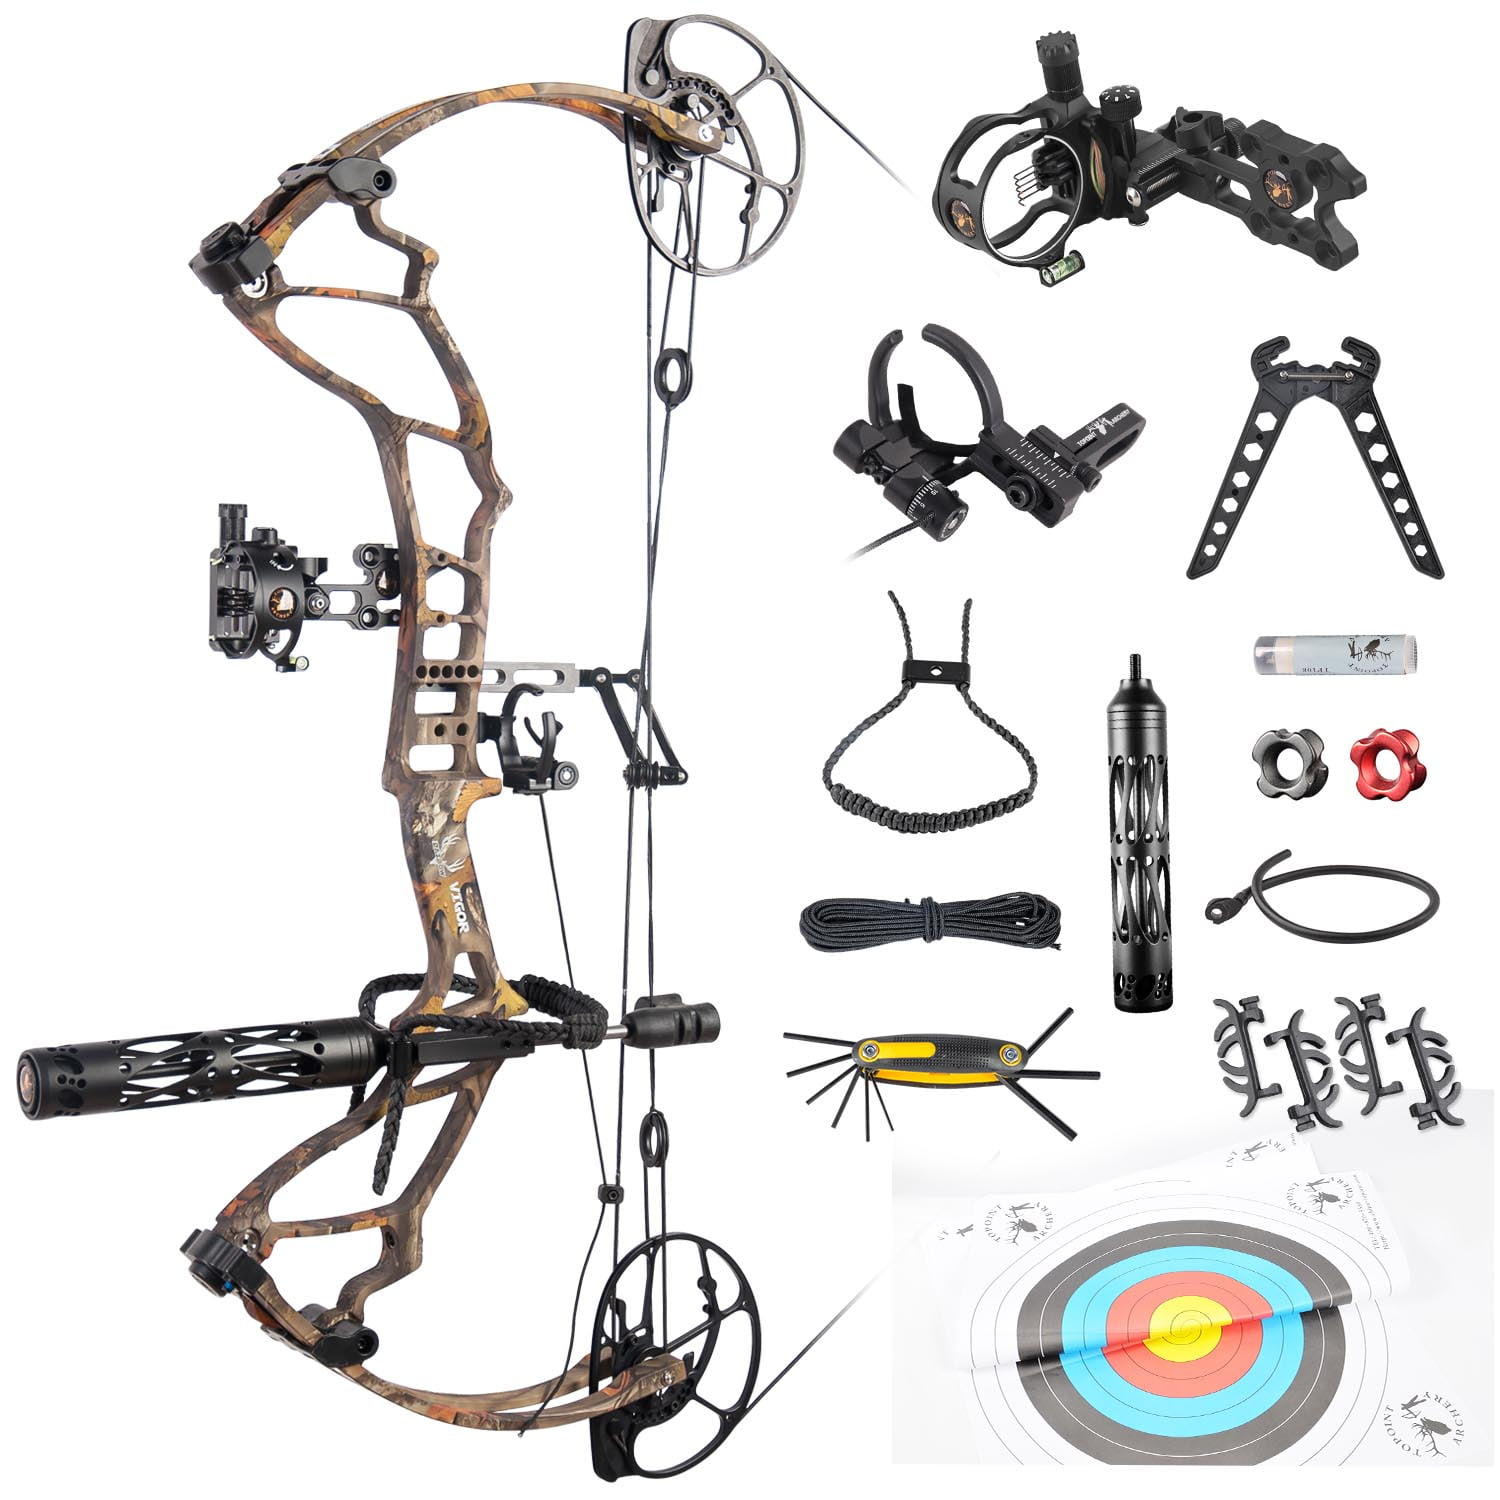 Vigor High Speed Hunting Compound Bow Package USA Gordon Composites ...